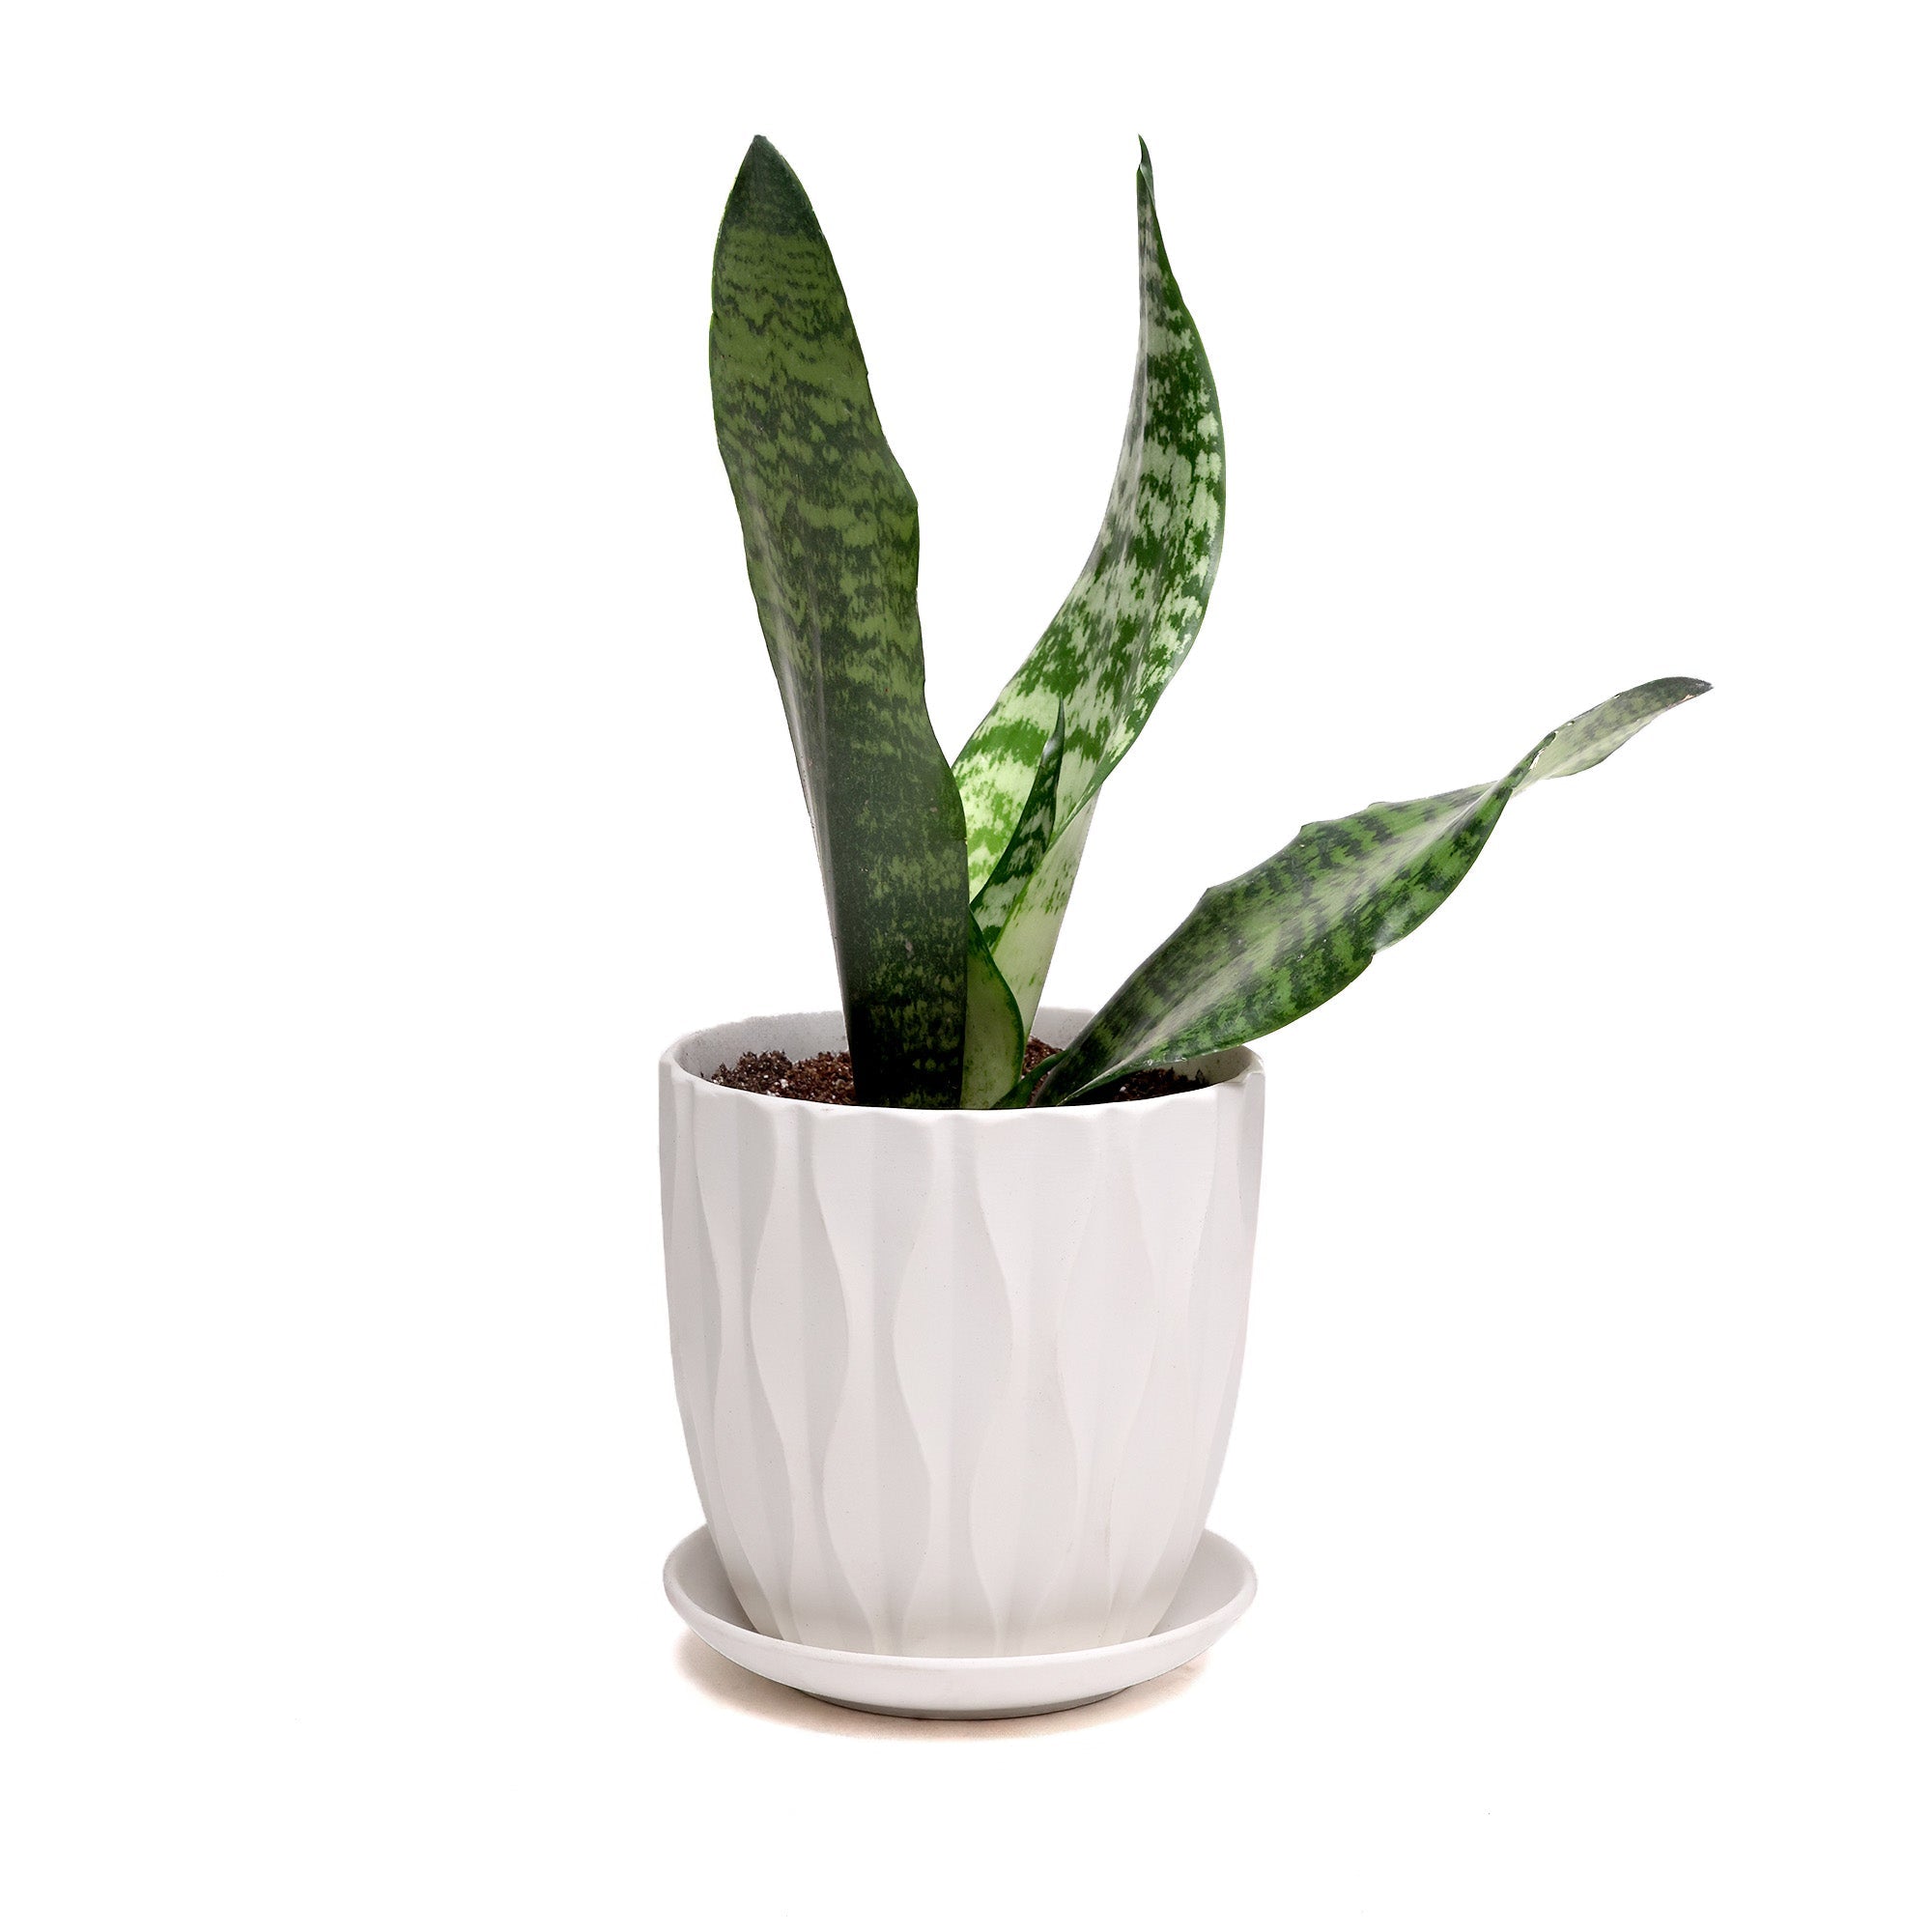 A Potted Snake Plant Black Coral 4” in Virago E by Chive Studio with three tall, upright leaves featuring green horizontal stripes, nestled in a textured white pot on a white background.